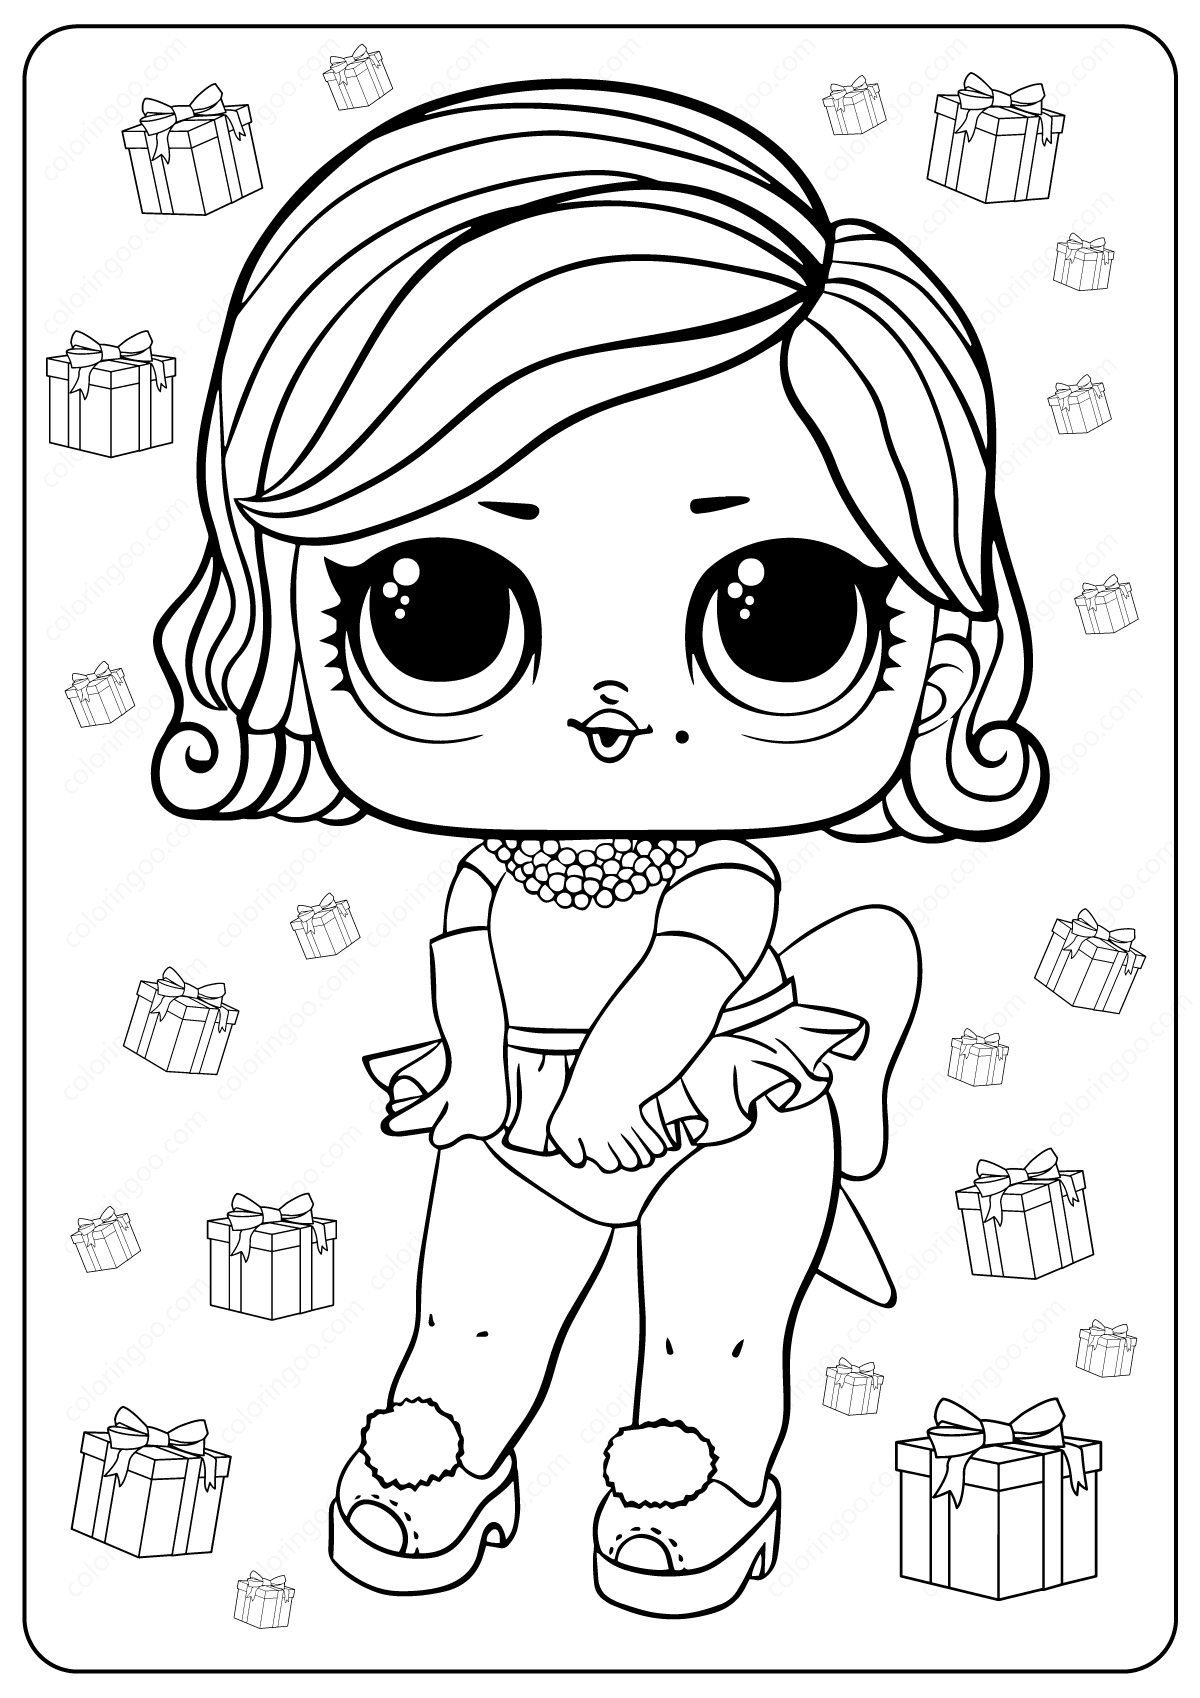 LOL Coloring Pages FREE Printable 54